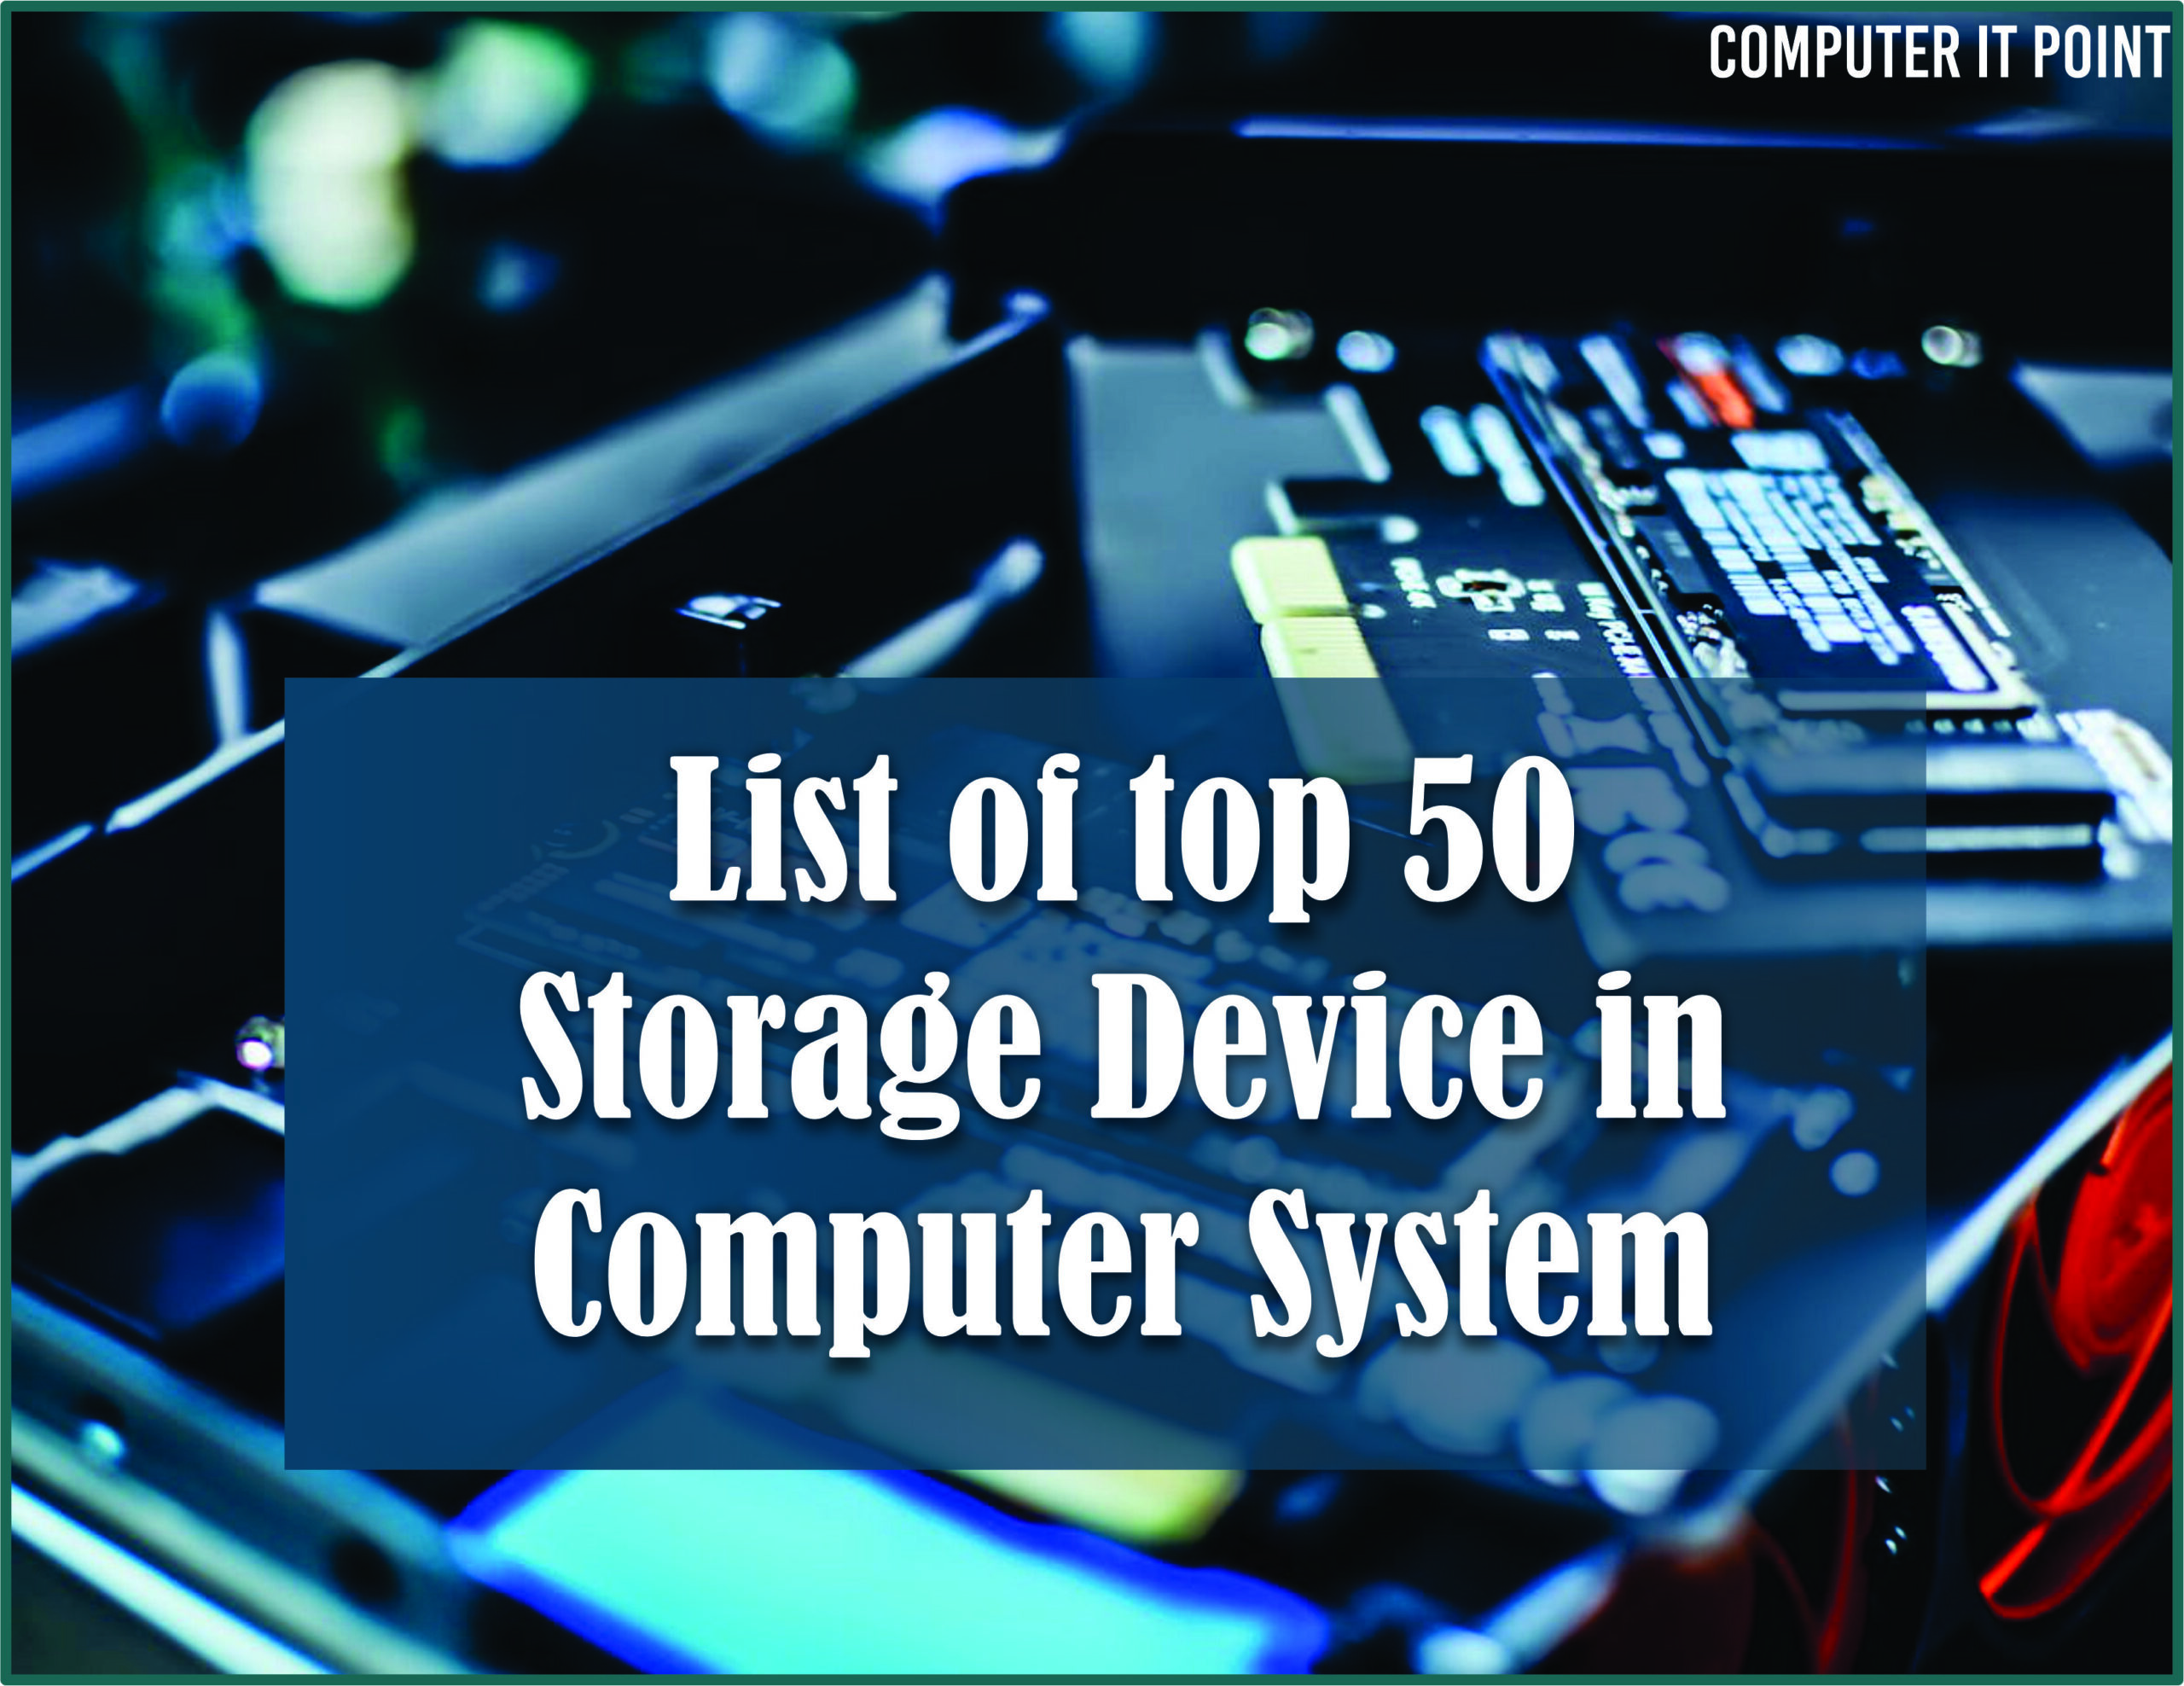 List of top 50 Storage Device in Computer System Computer IT Point